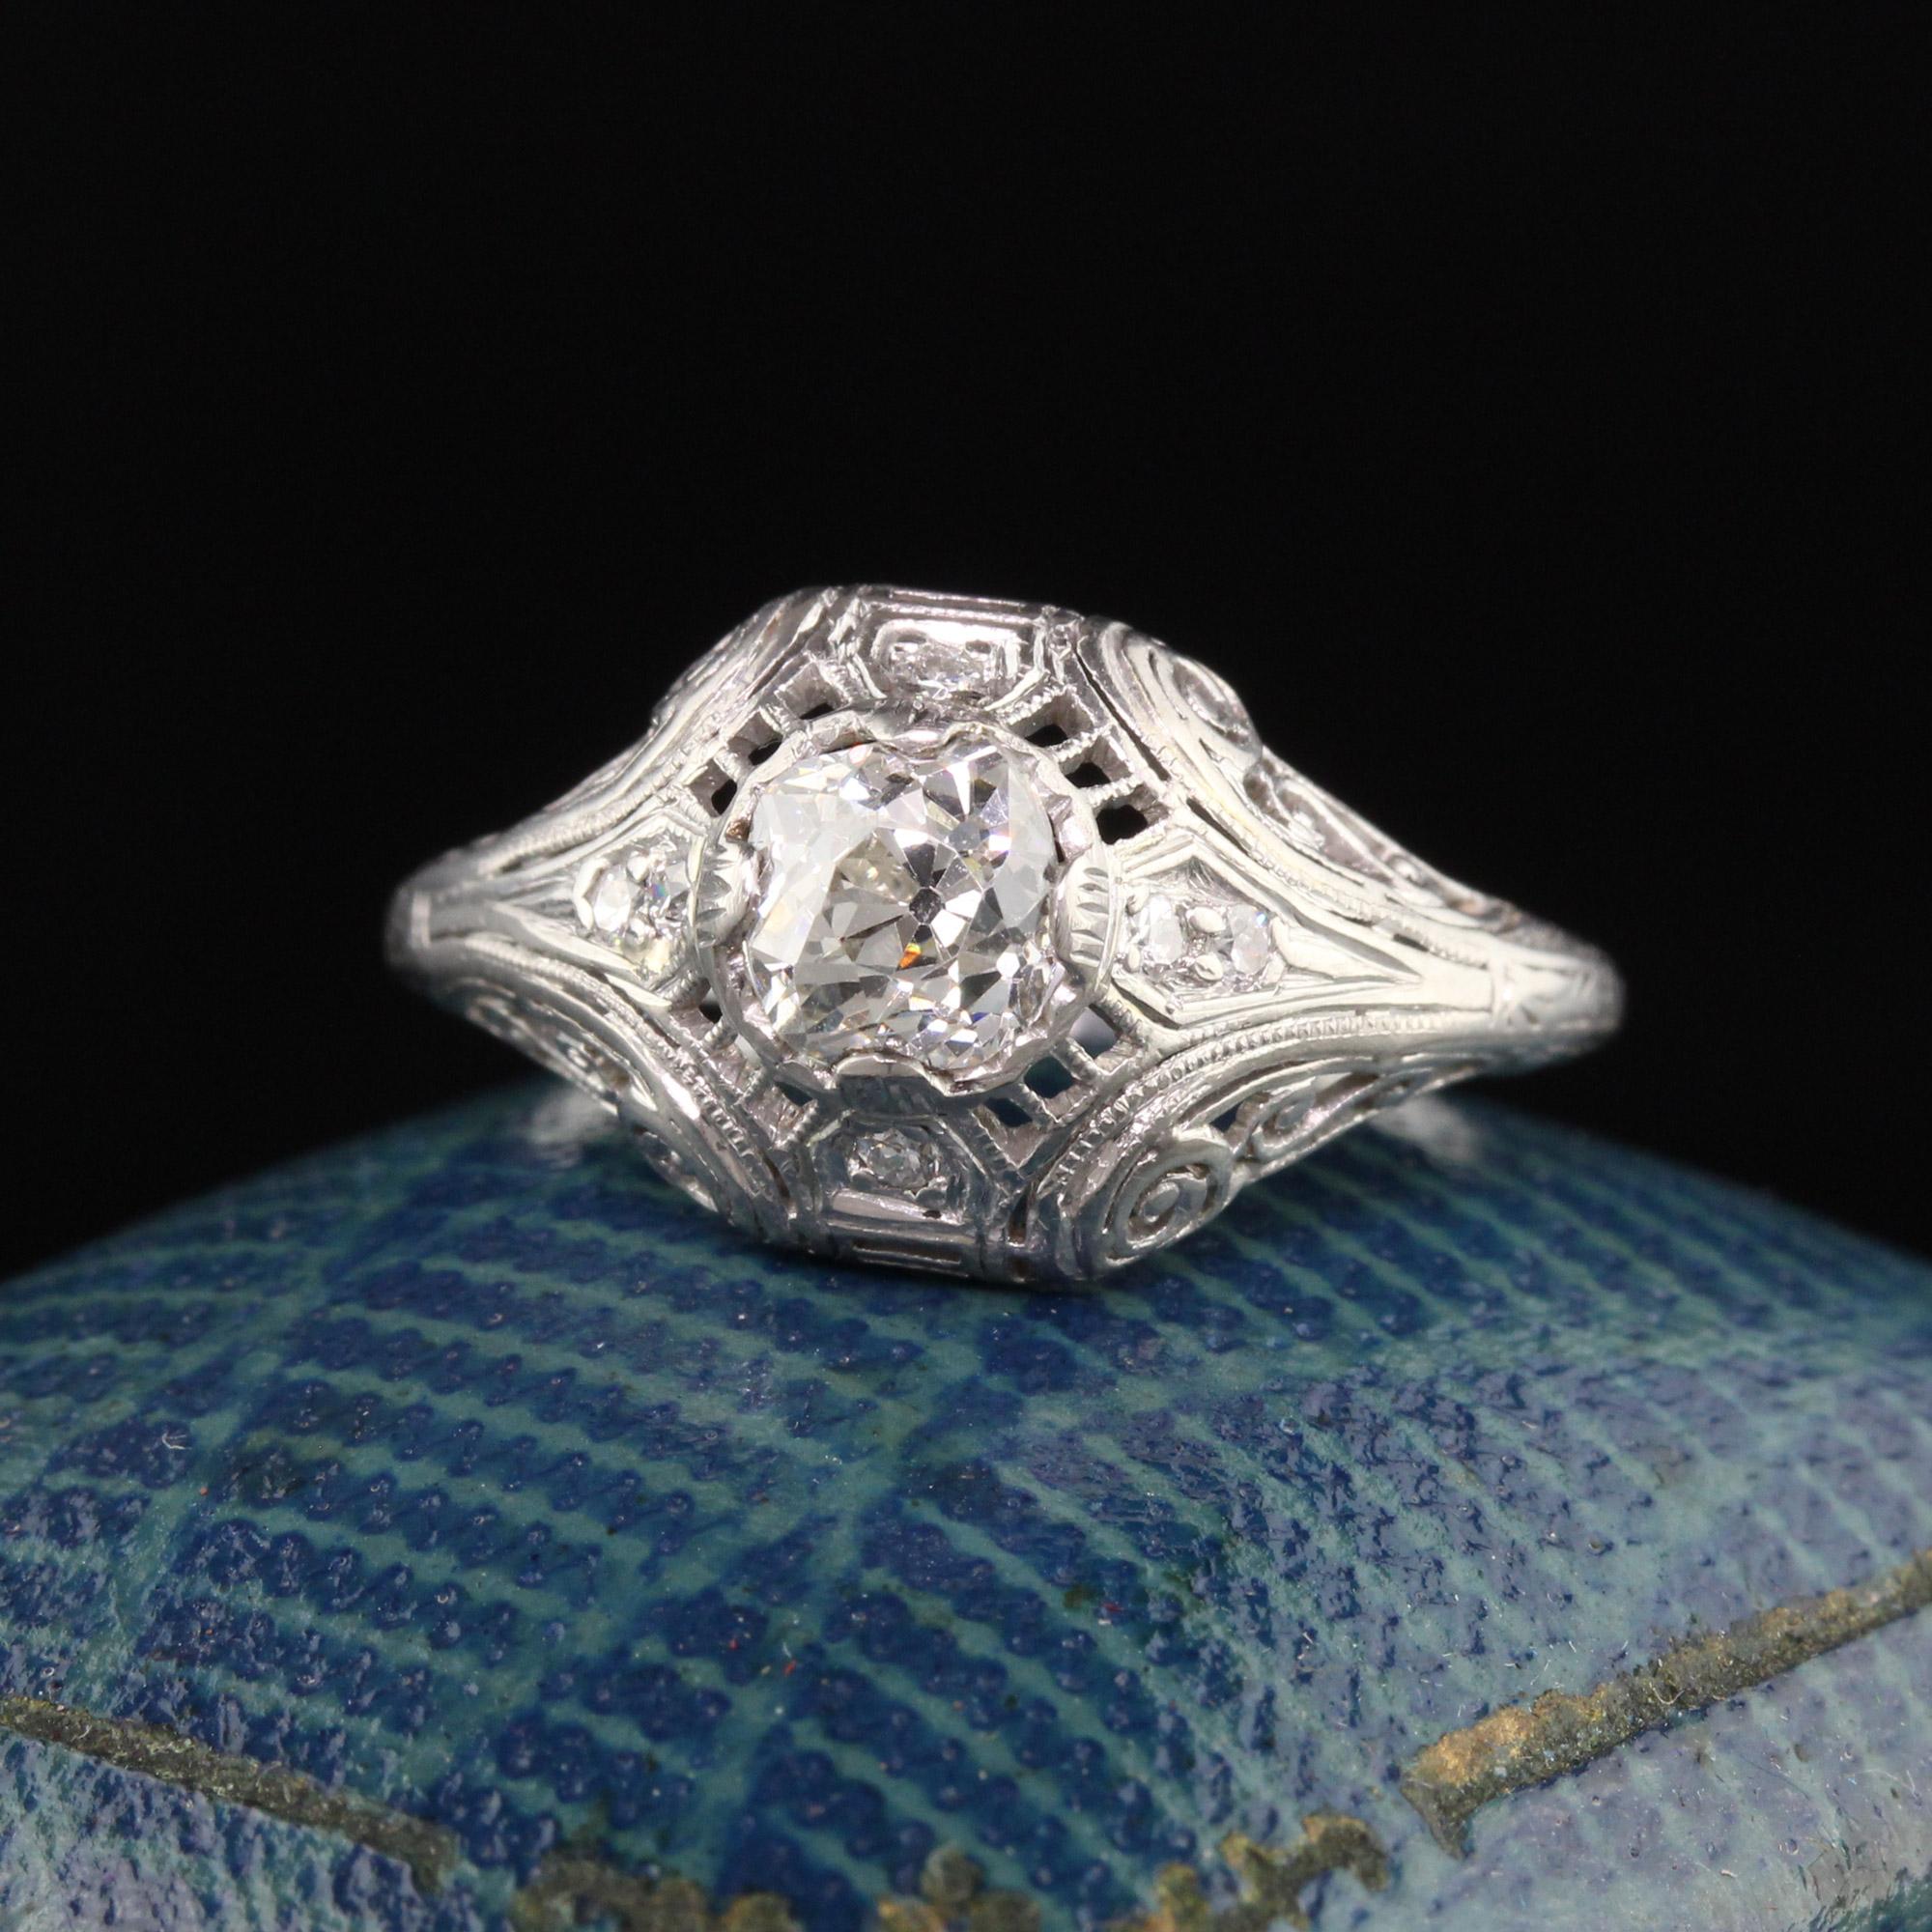 Beautiful Antique Art Deco Platinum Old Mine Diamond Filigree Engagement Ring. This classic style art deco engagement ring features an old mine cut diamond in the center on a filigree mounting.

Item #R1074

Metal: Platinum

Weight: 2.9 Grams

Size: